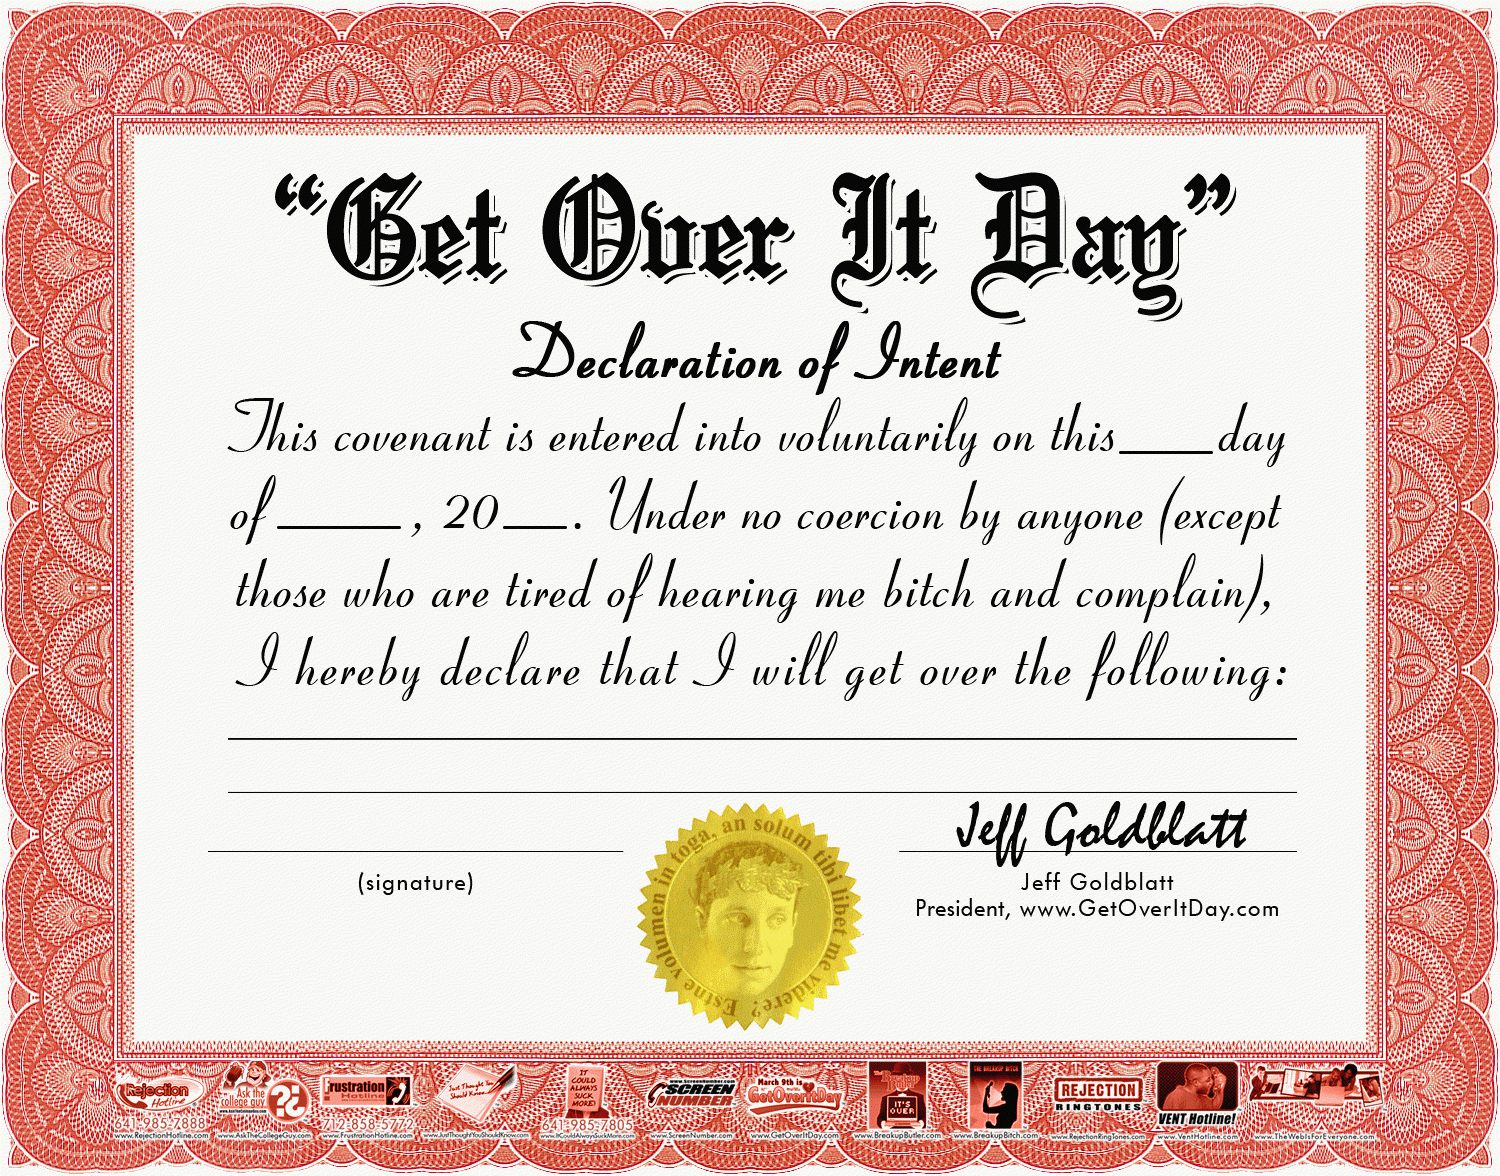 Funny Office Awards Youtube. Silly Certificates Funny Awards For Funny Certificate Templates